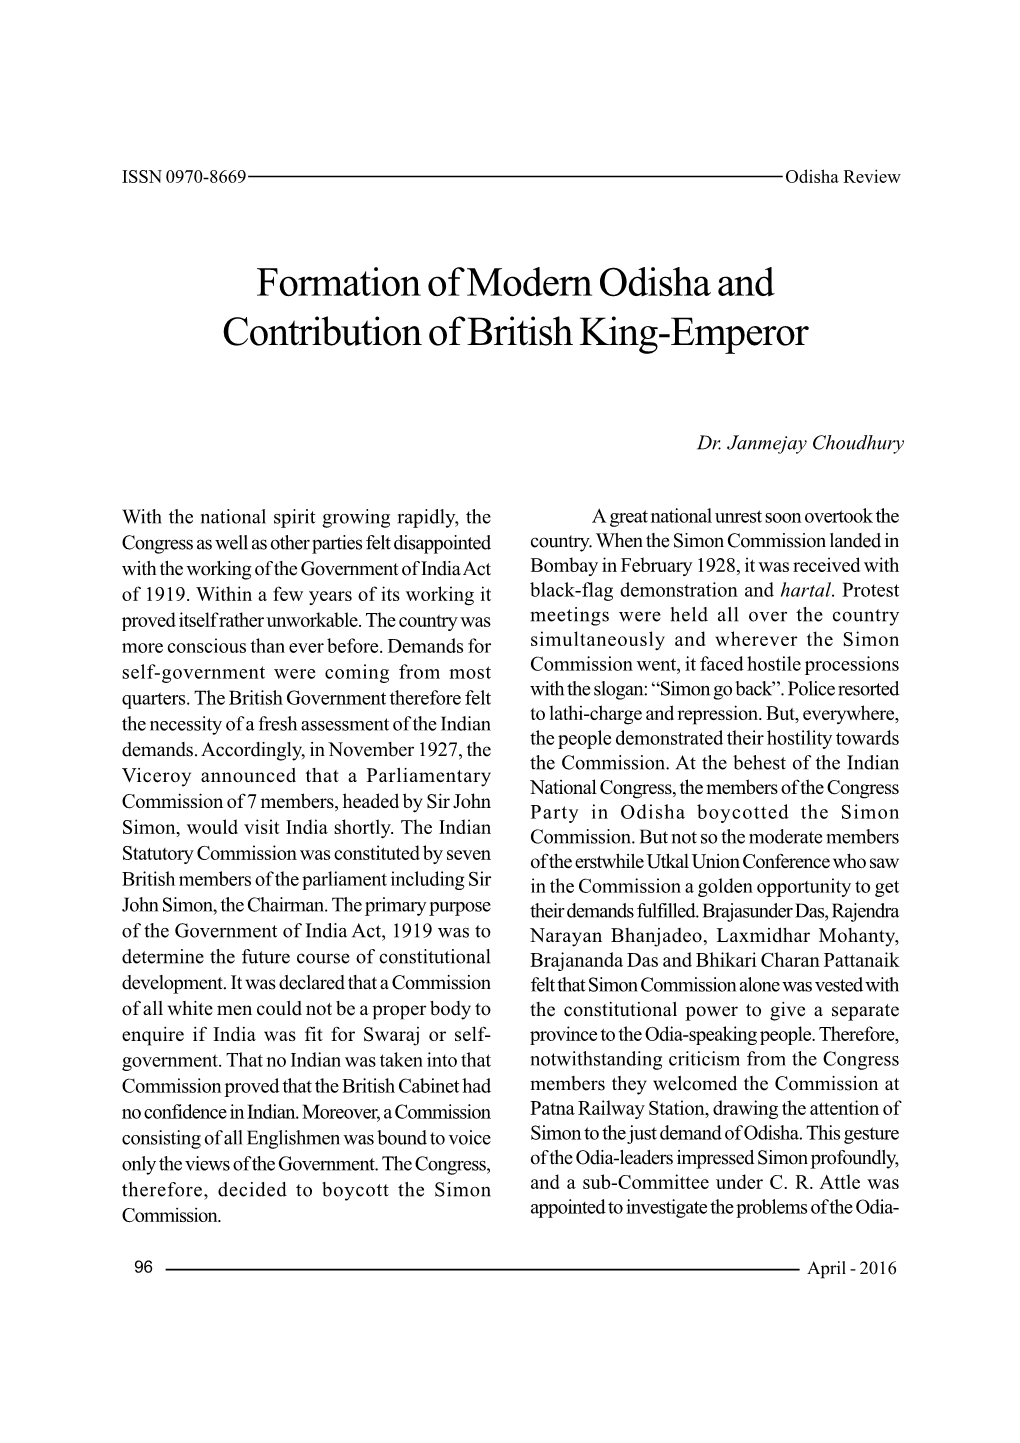 Formation of Modern Odisha and Contribution of British King-Emperor